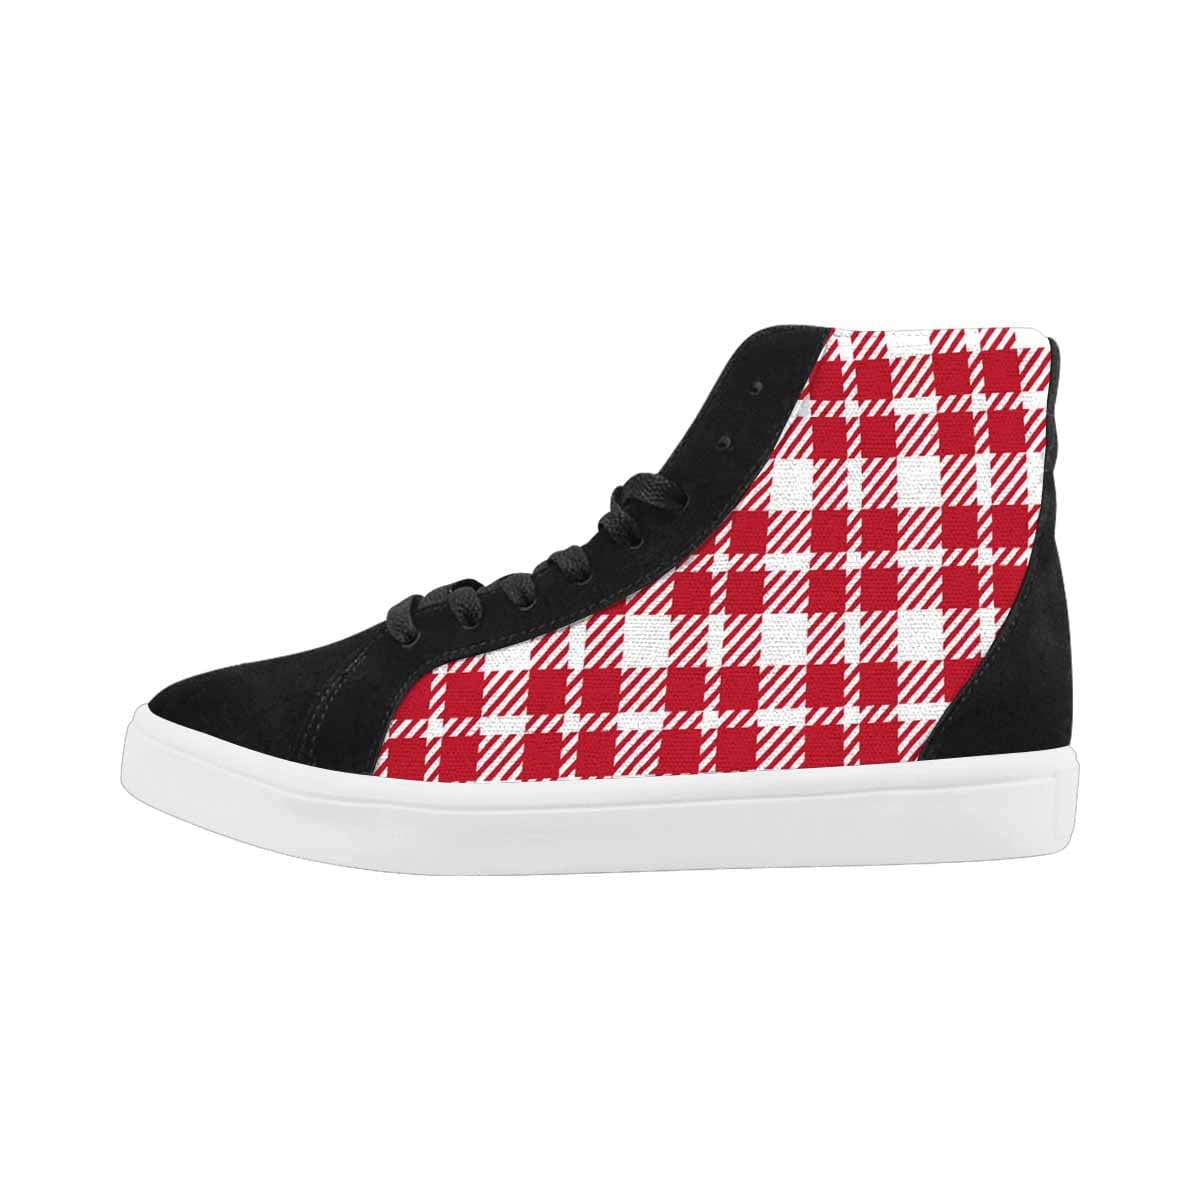 Sneakers For Women, Buffalo Plaid Red And White - High Top Sports Shoes-1